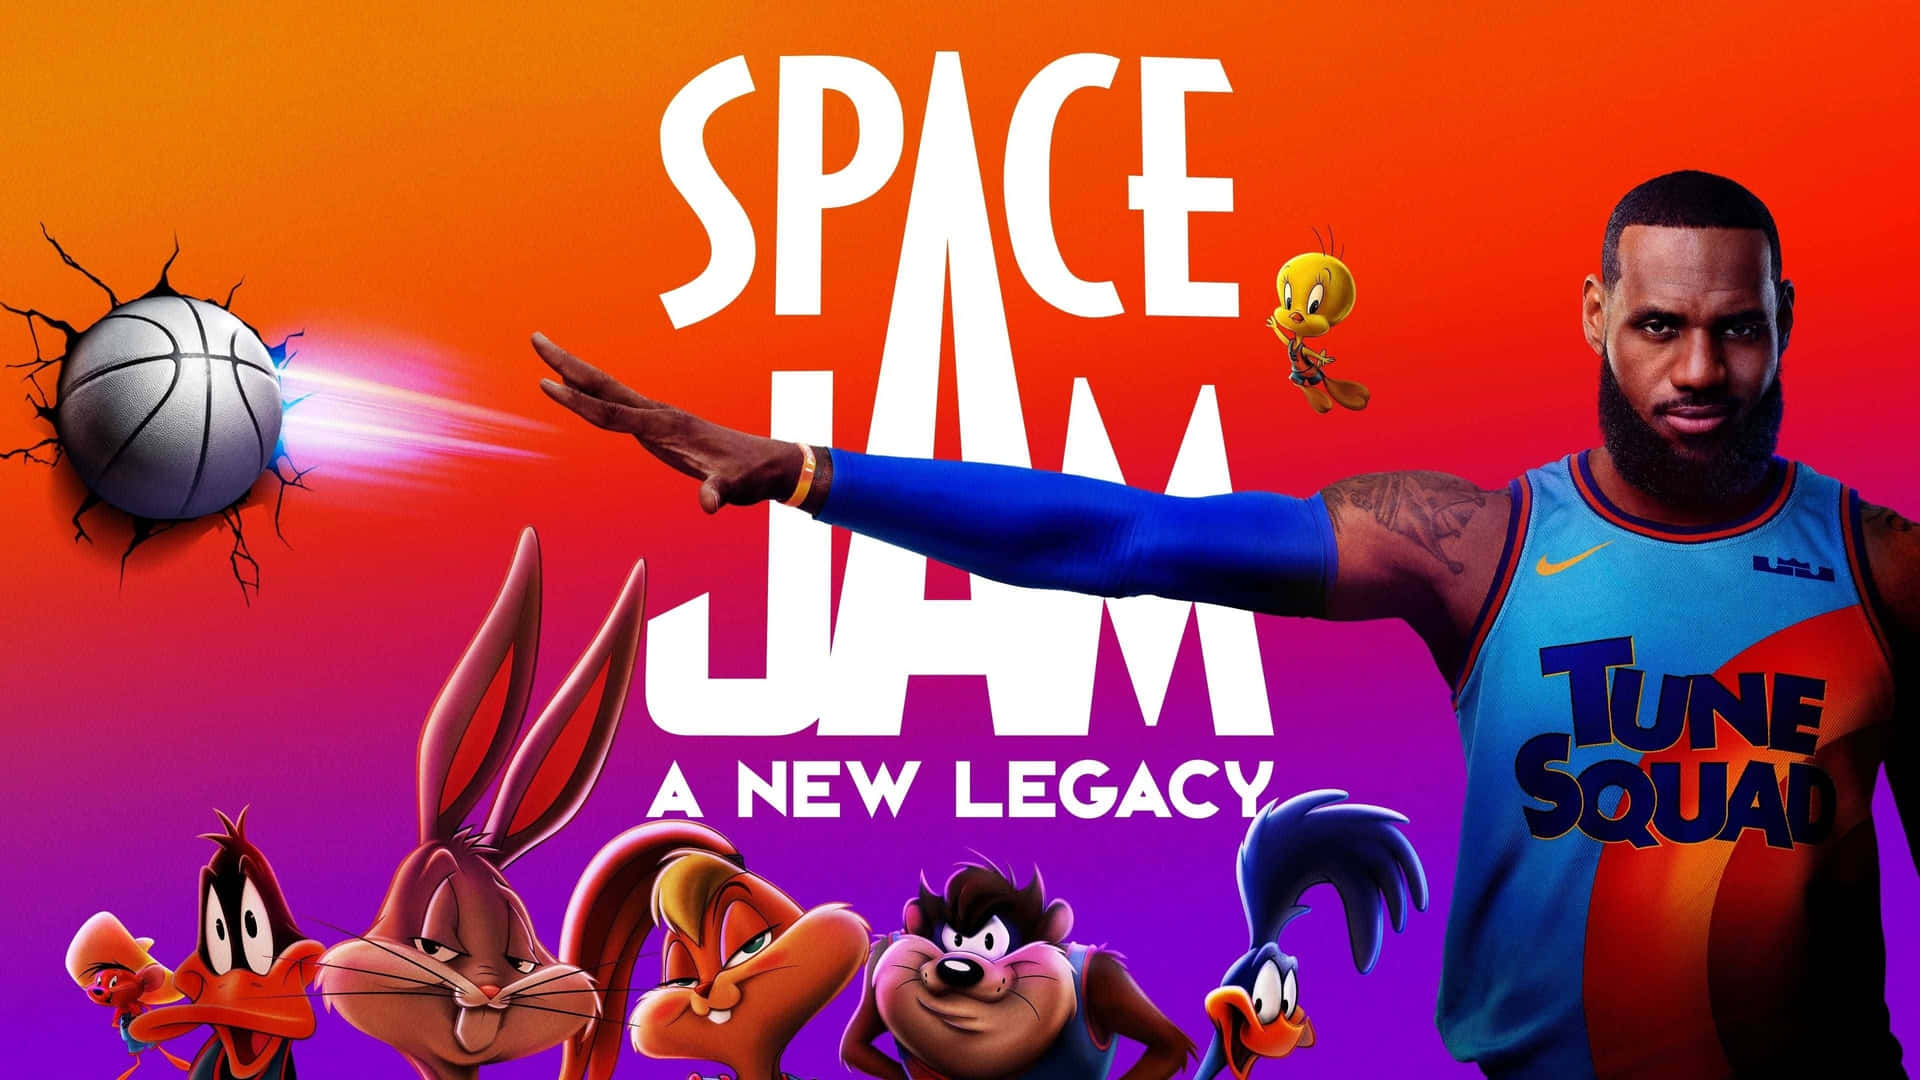 Join the Cool Space Jam! Wallpaper